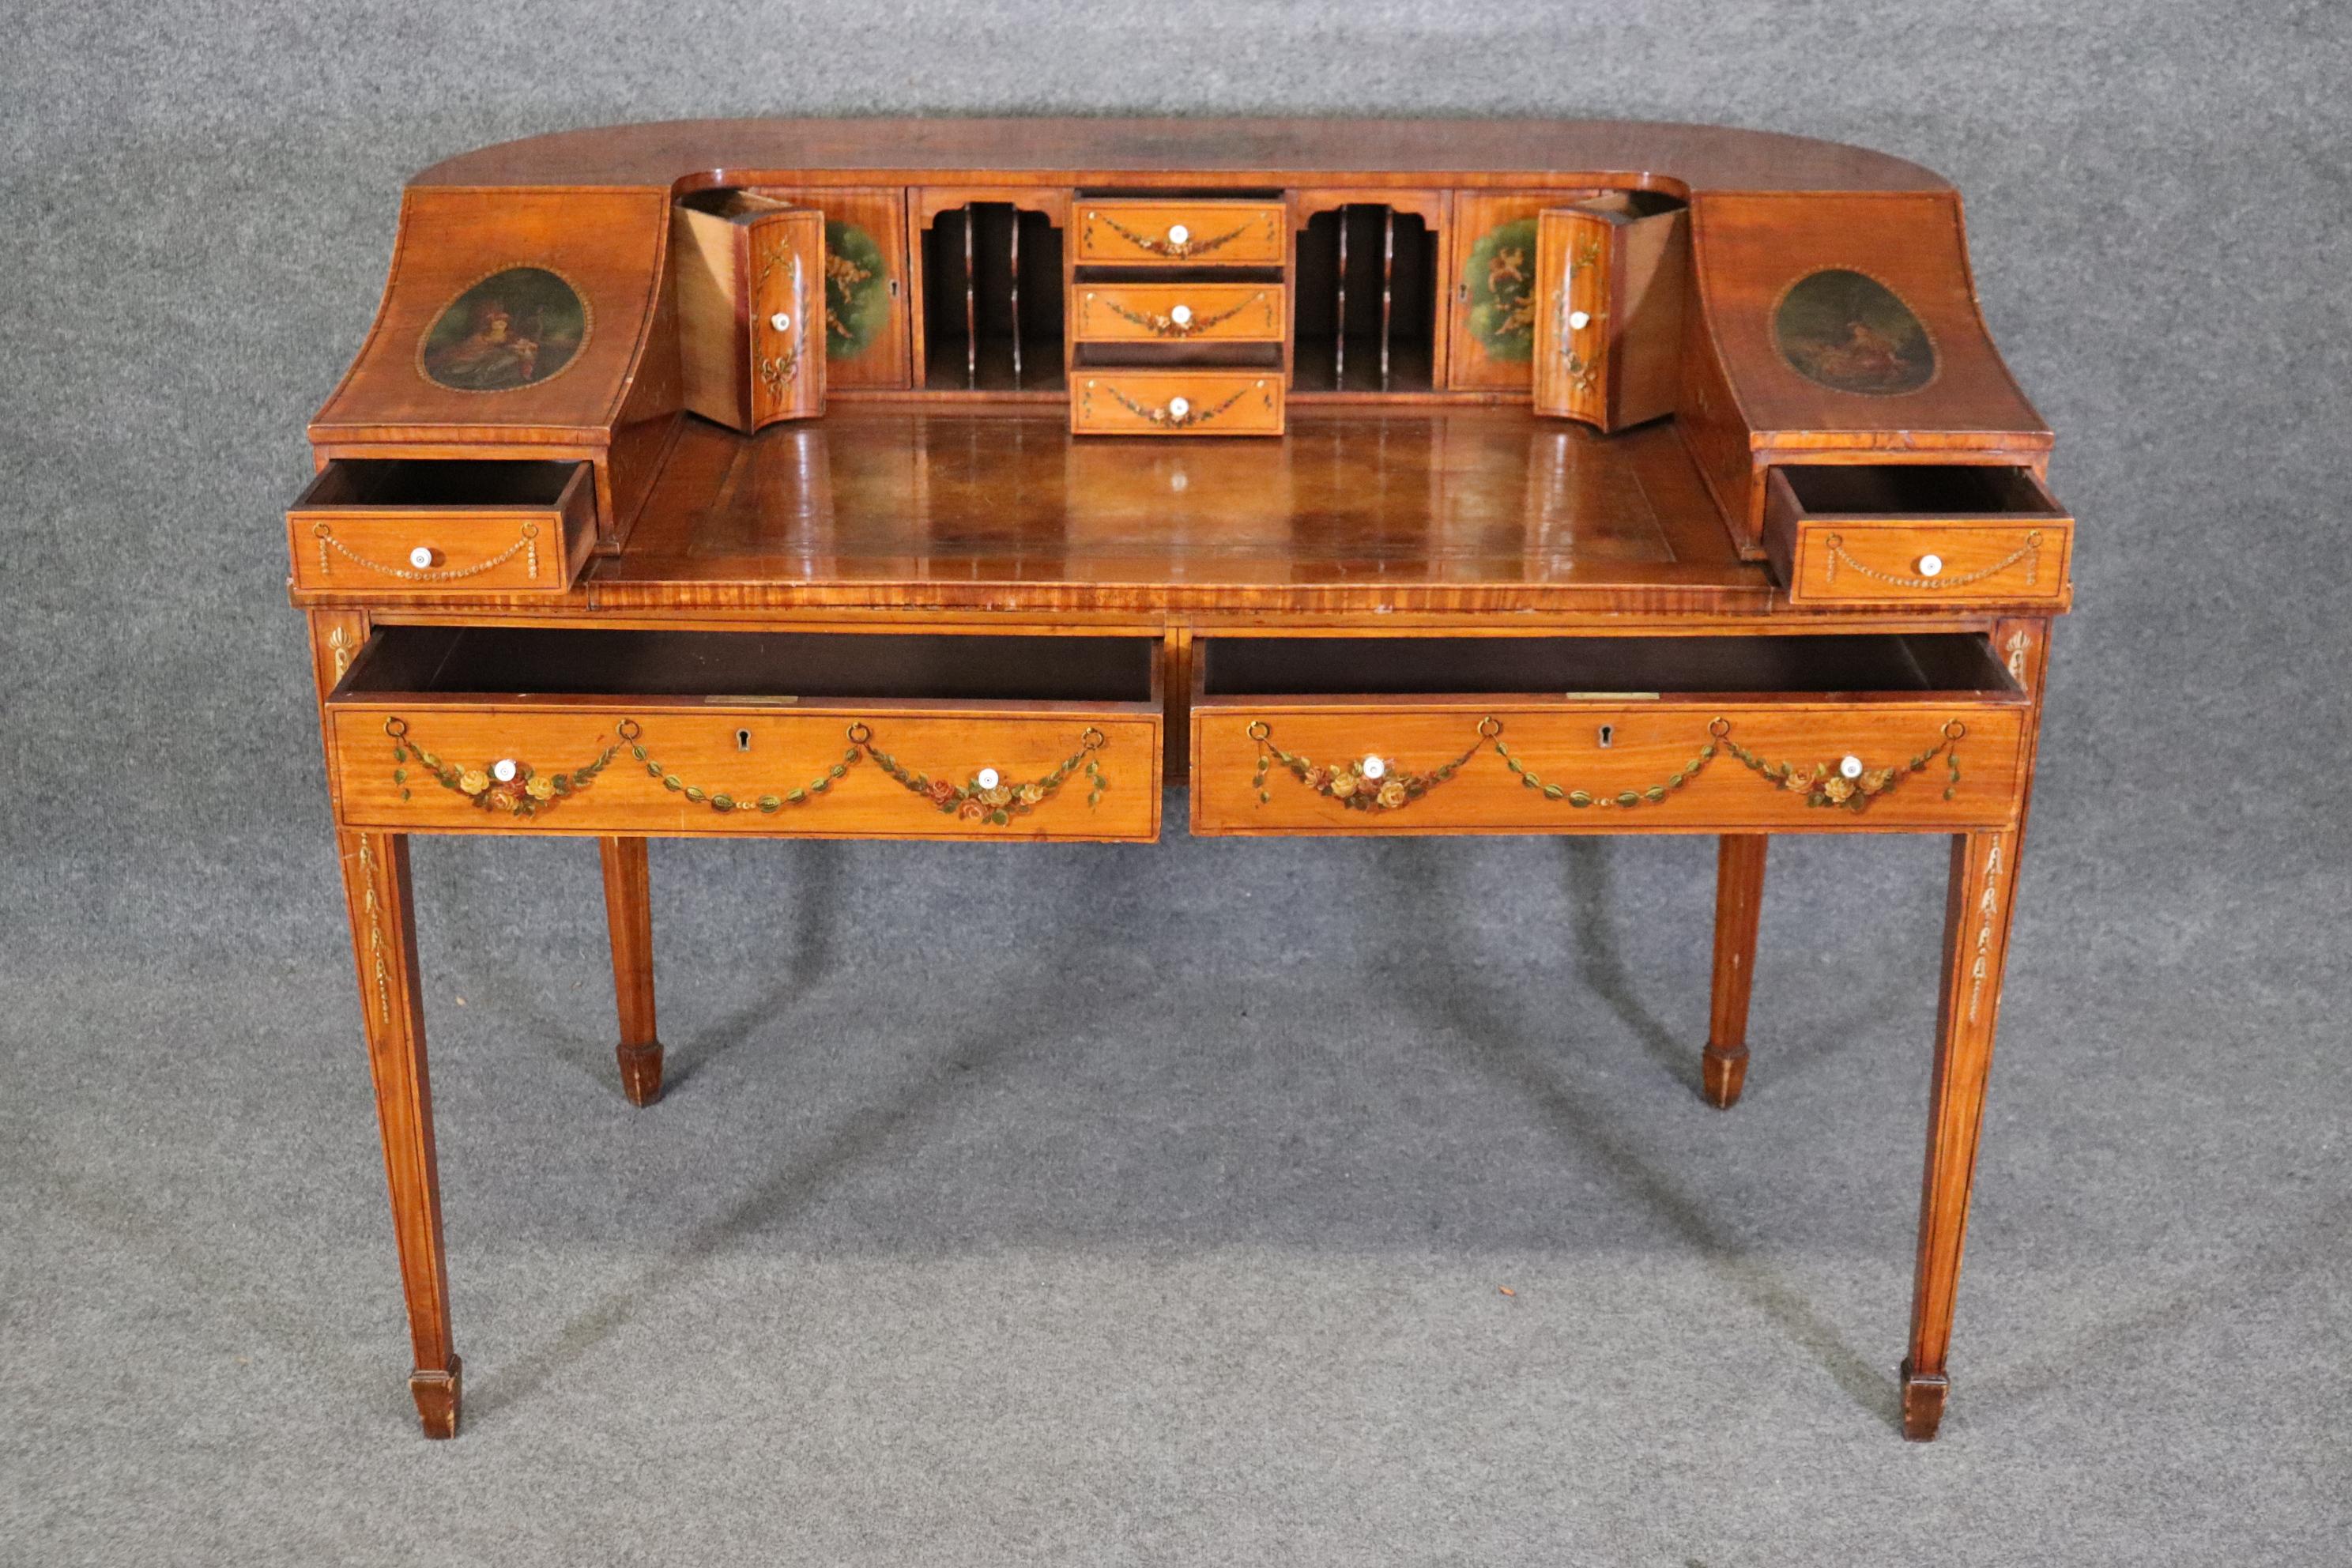 Fine Quality English Satinwood Carlton House Desk with Cherubs and Musical Theme 6